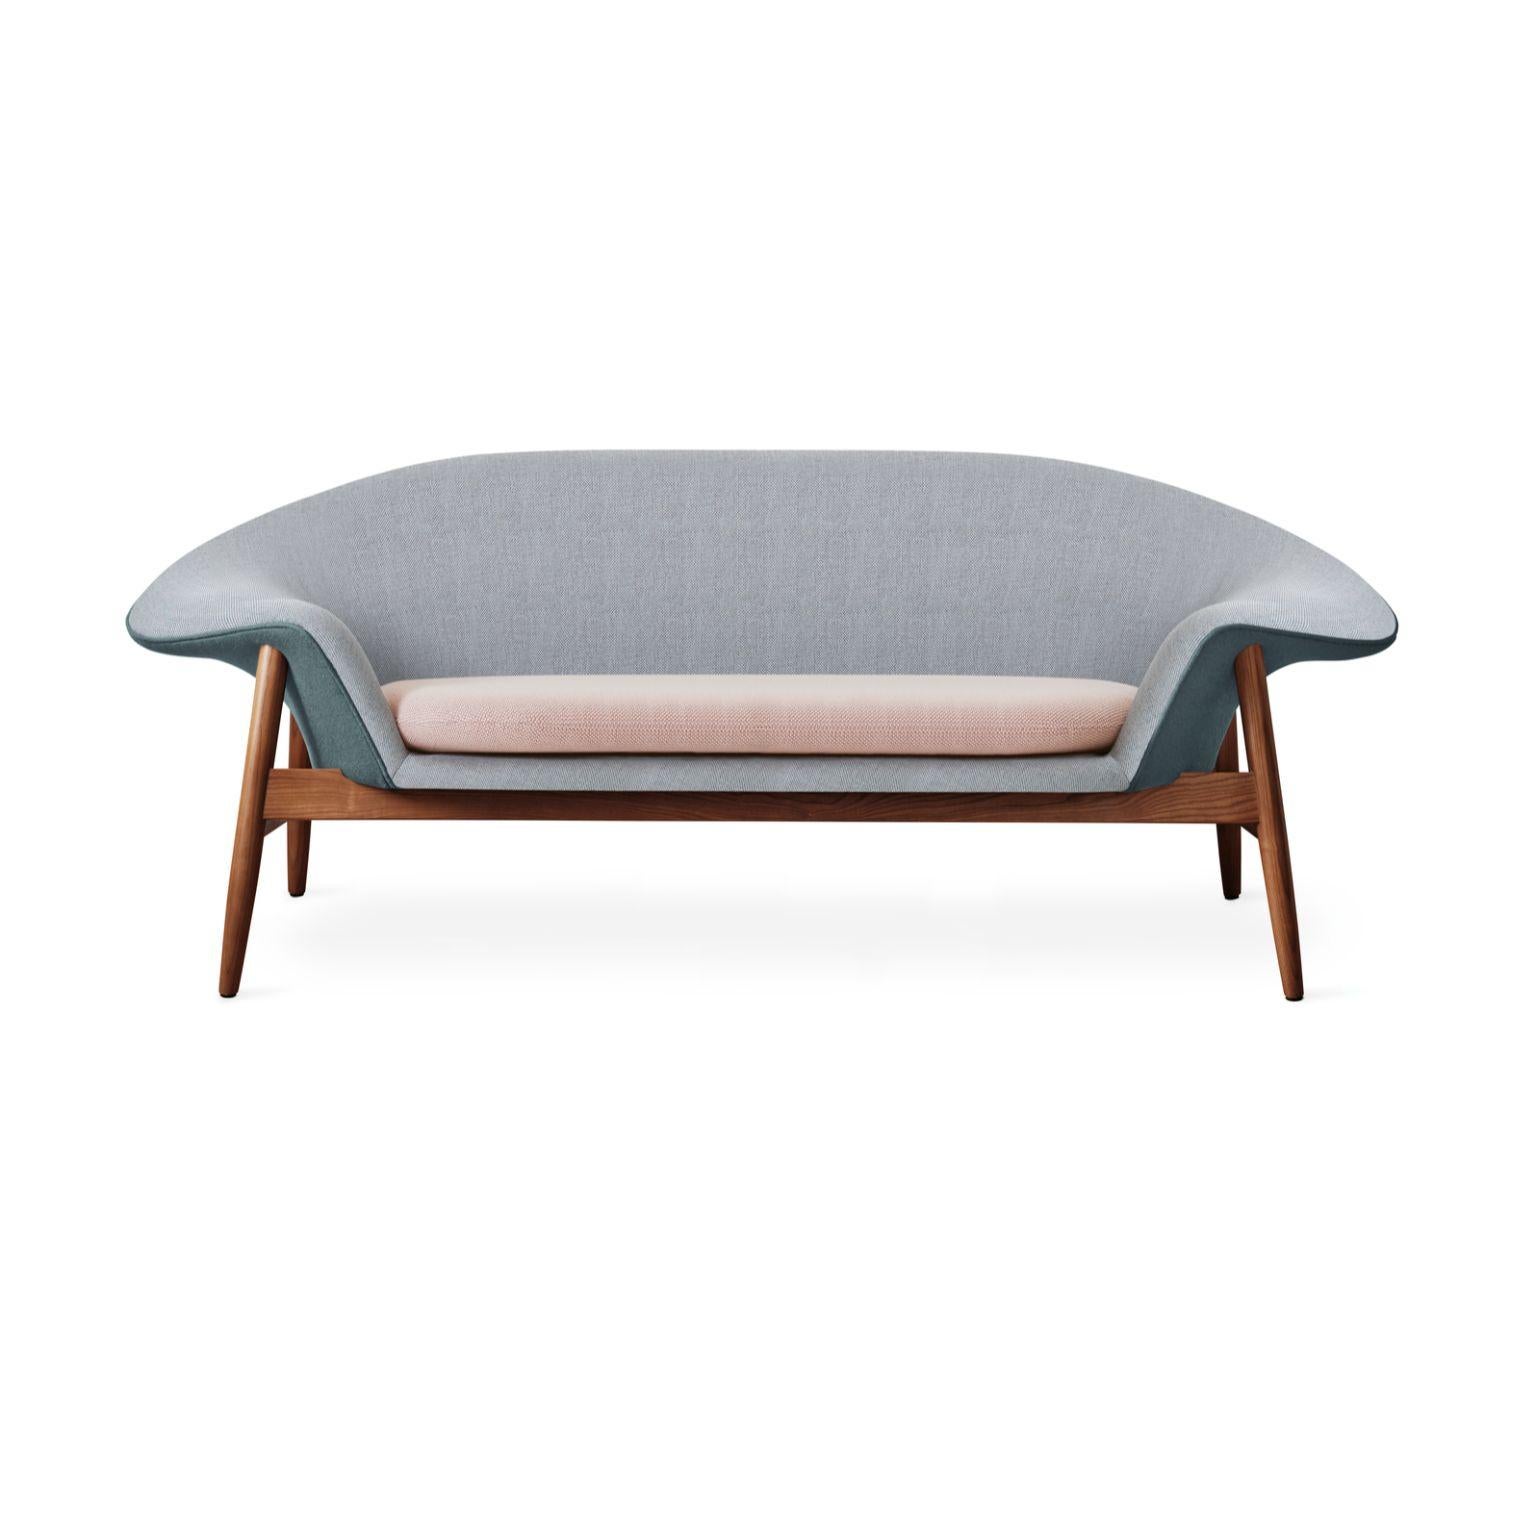 Fried Egg sofa light green petrol pale peach by Warm Nordic
Dimensions: D 186 x W 68 x H 68 cm
Material: Textile upholstery, Solid oiled teak
Weight: 42 kg
Also available in different colours and finishes.

Warm Nordic is an ambitious design